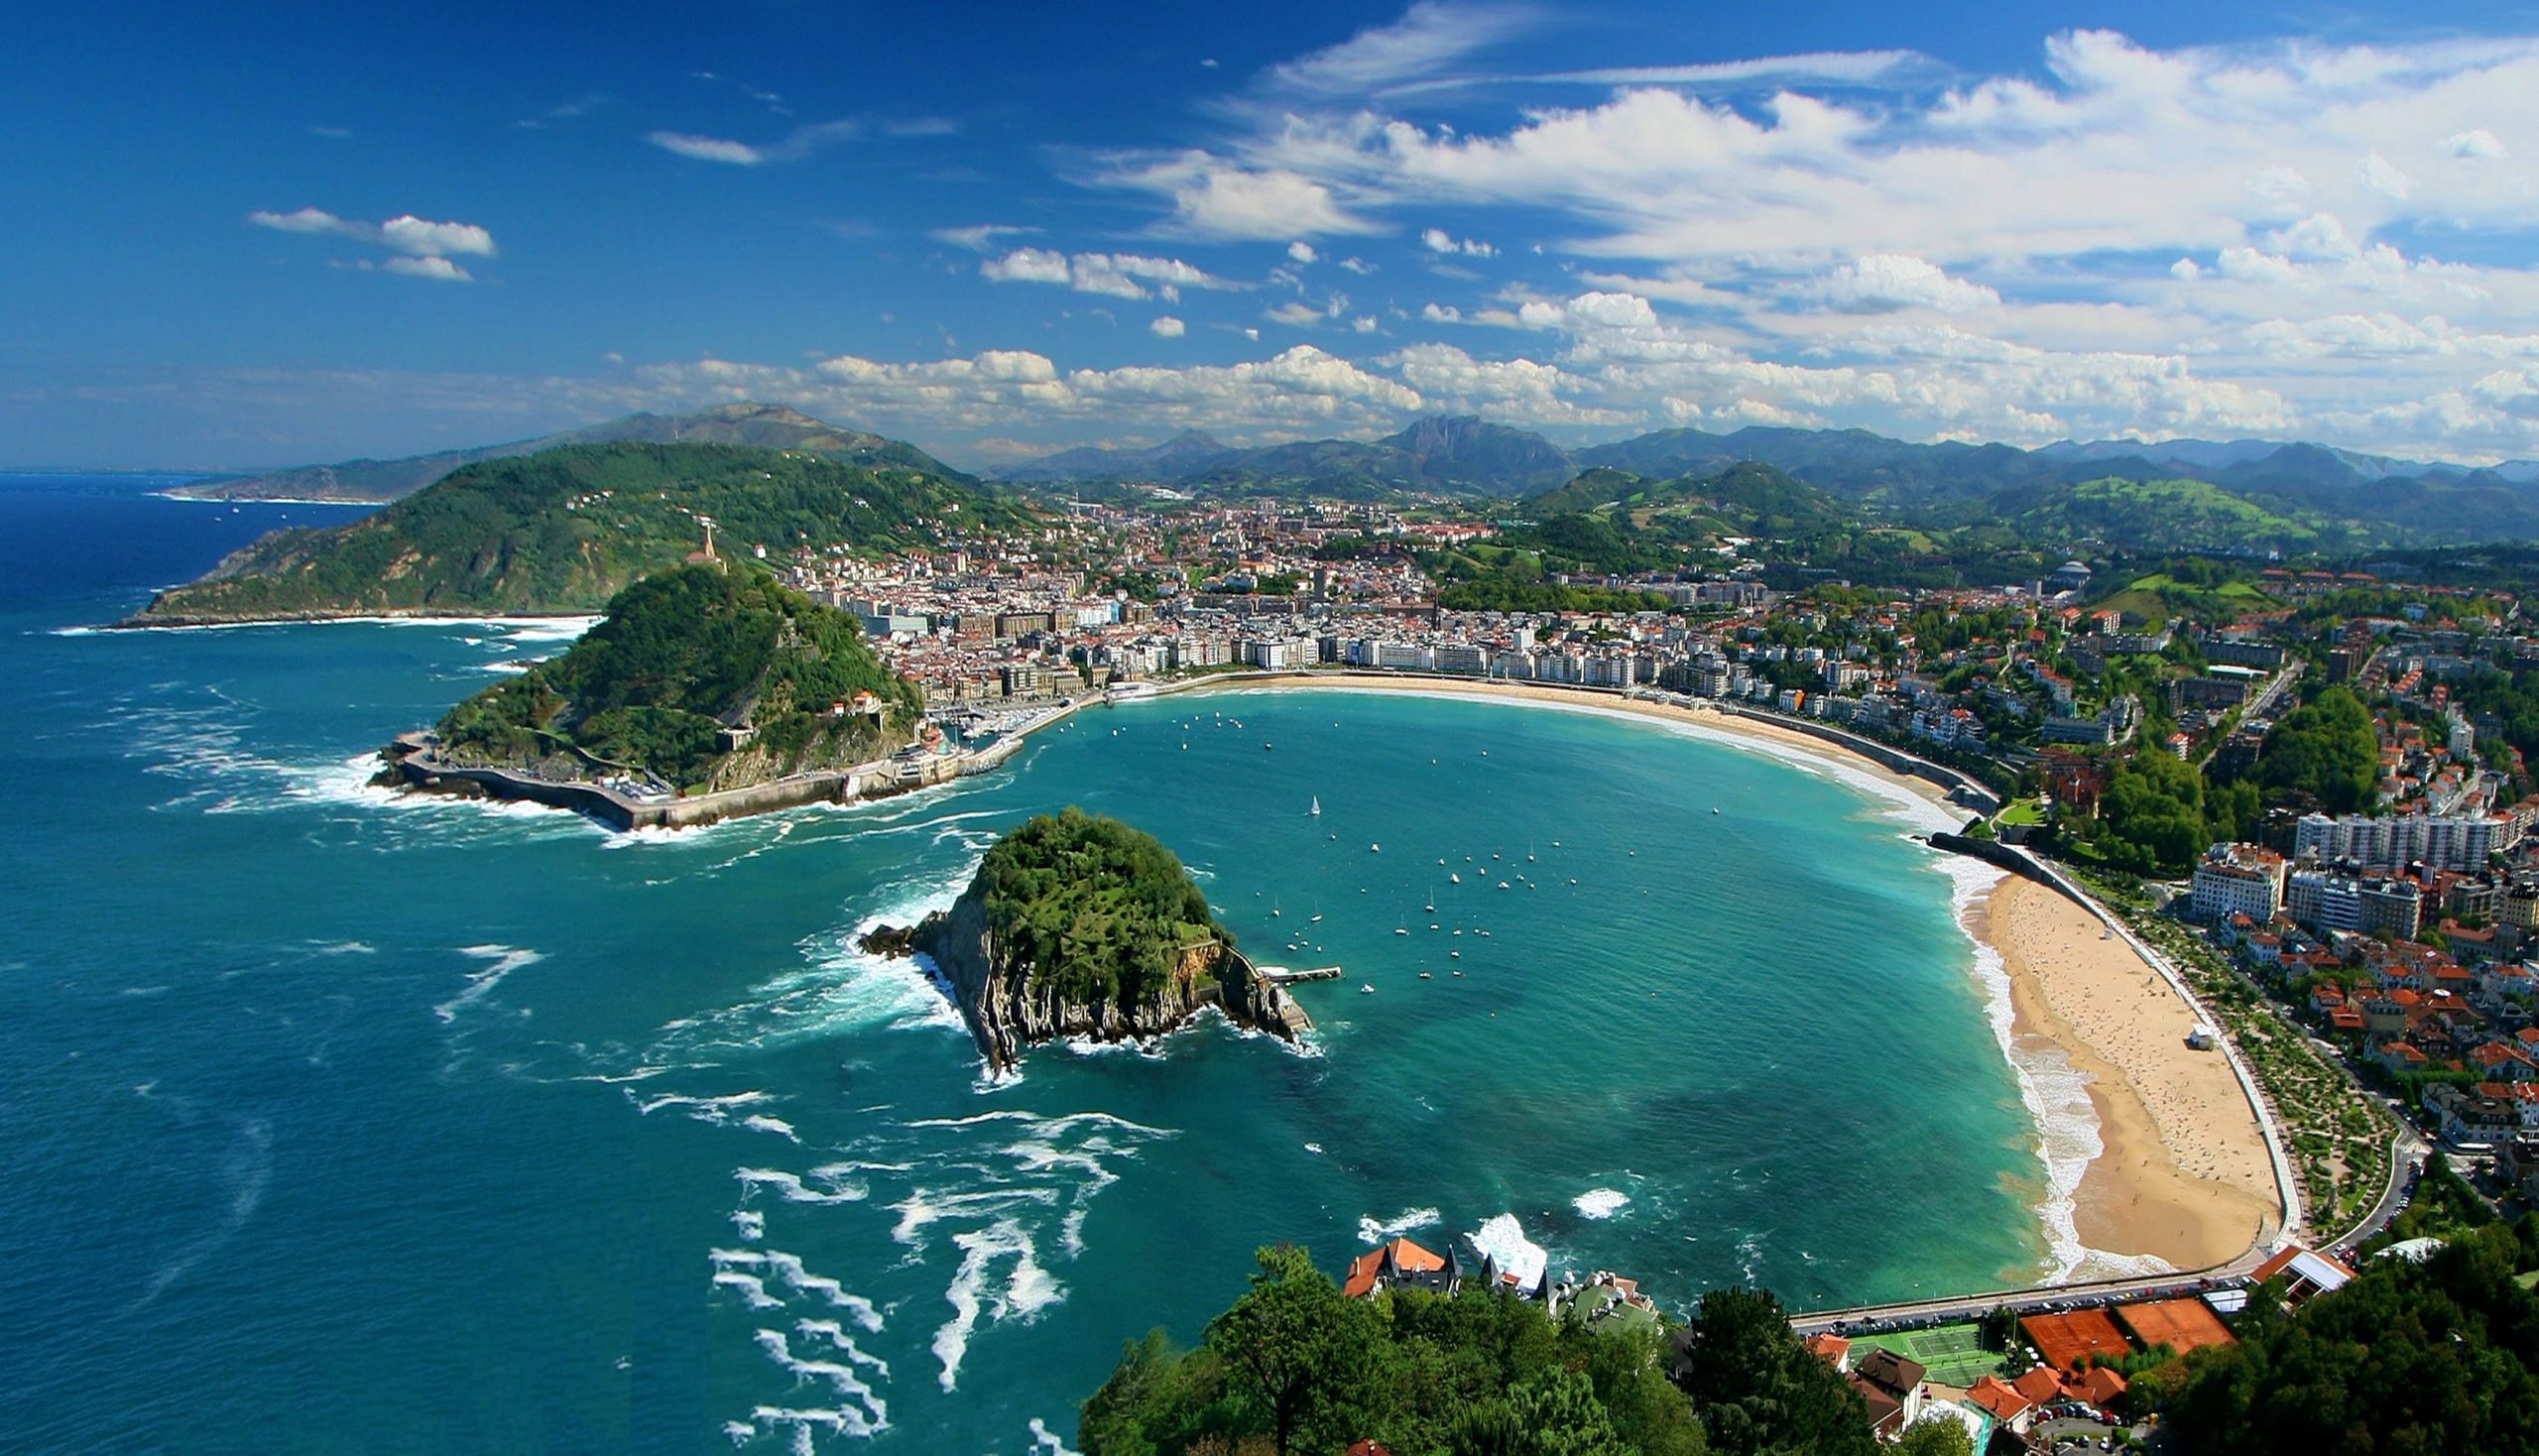 How To Get From Bilbao Airport To San Sebastian - All Possible Ways